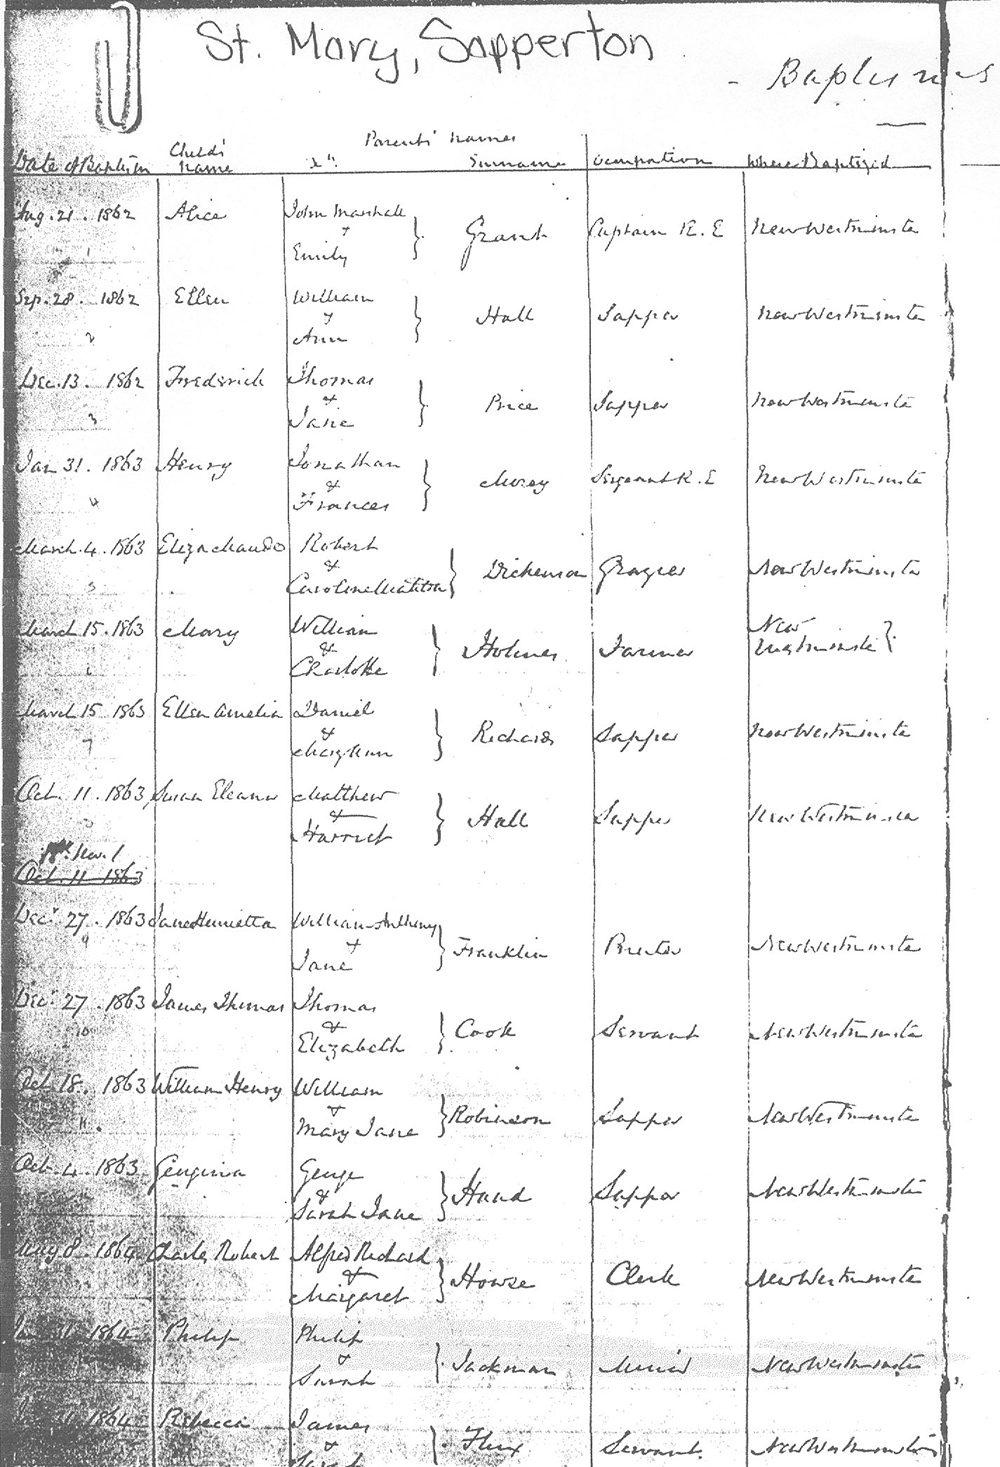 A facsimile of an 1864 baptismal record from St. Mary’s church in Sapperton. It documents the date of birth of Philip Jackman Jr., and lists Philip and Sarah Jackman as parents.